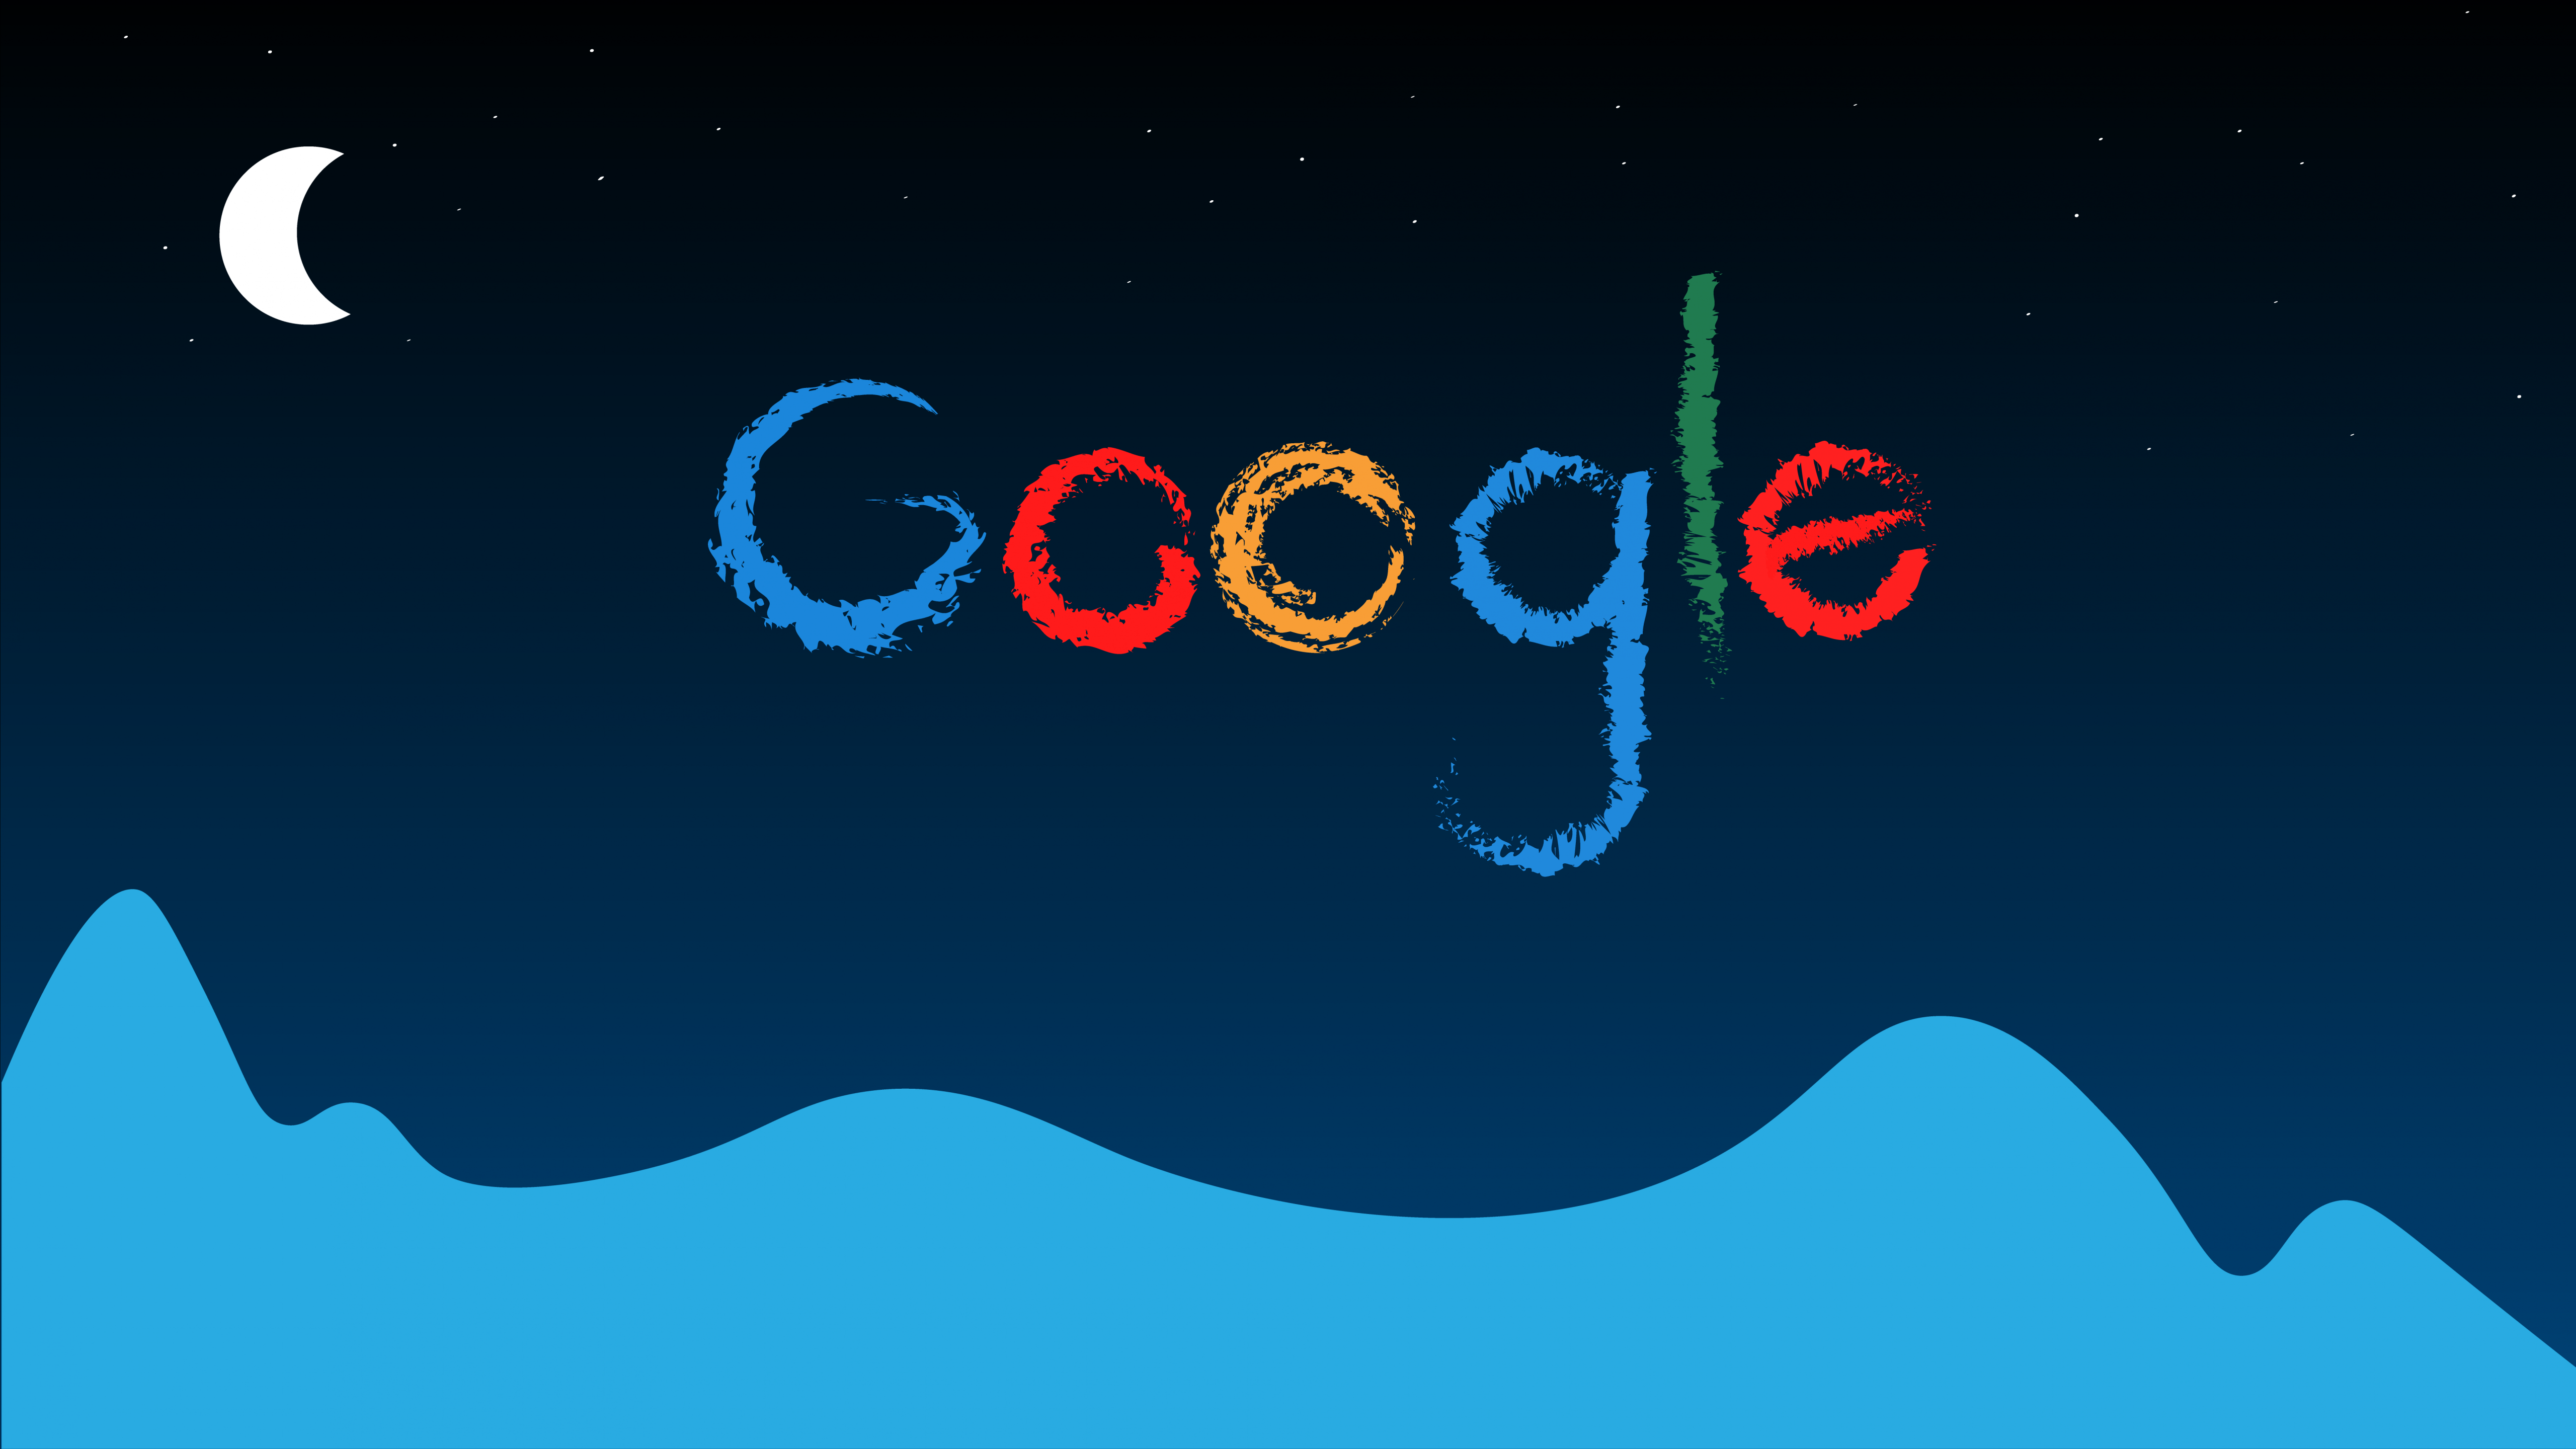 HD wallpaper Google logo colorful search engine illustration  backgrounds  Wallpaper Flare